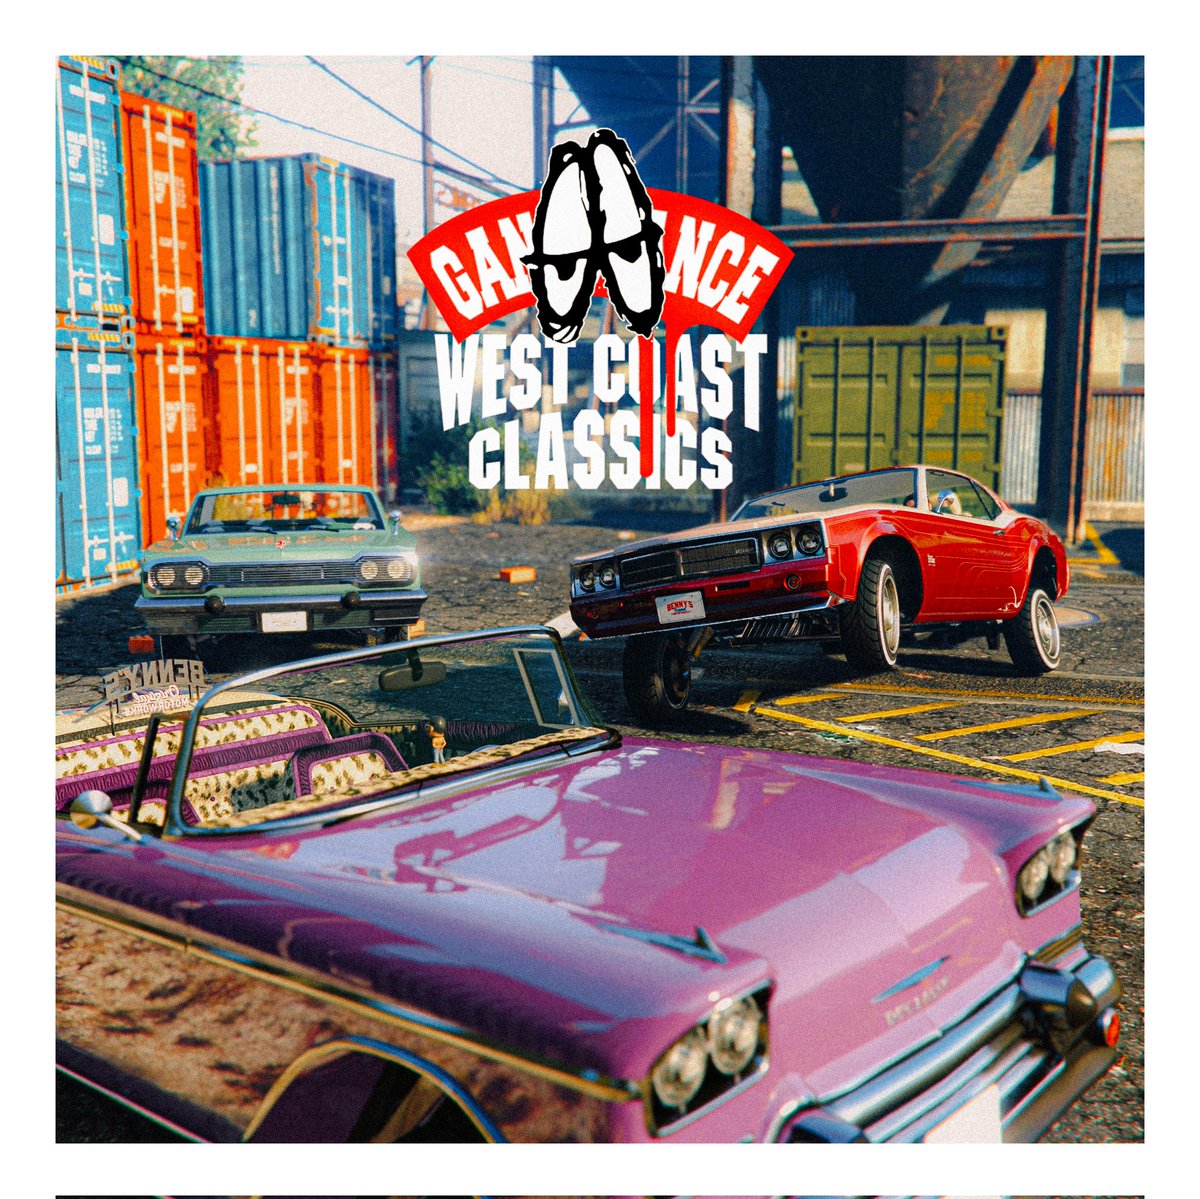 Lowrider meet Hosted by @Ibredz_
'Tap to enlarge'
#GANGSTANCE 
#STAYDOPE
#Playstation
#RockstarGames
#RockstarEditor
#GTAOnline #PS5
#GTAPhotography
#VirtualPhotography 
#Snapmatic
#GhostArts